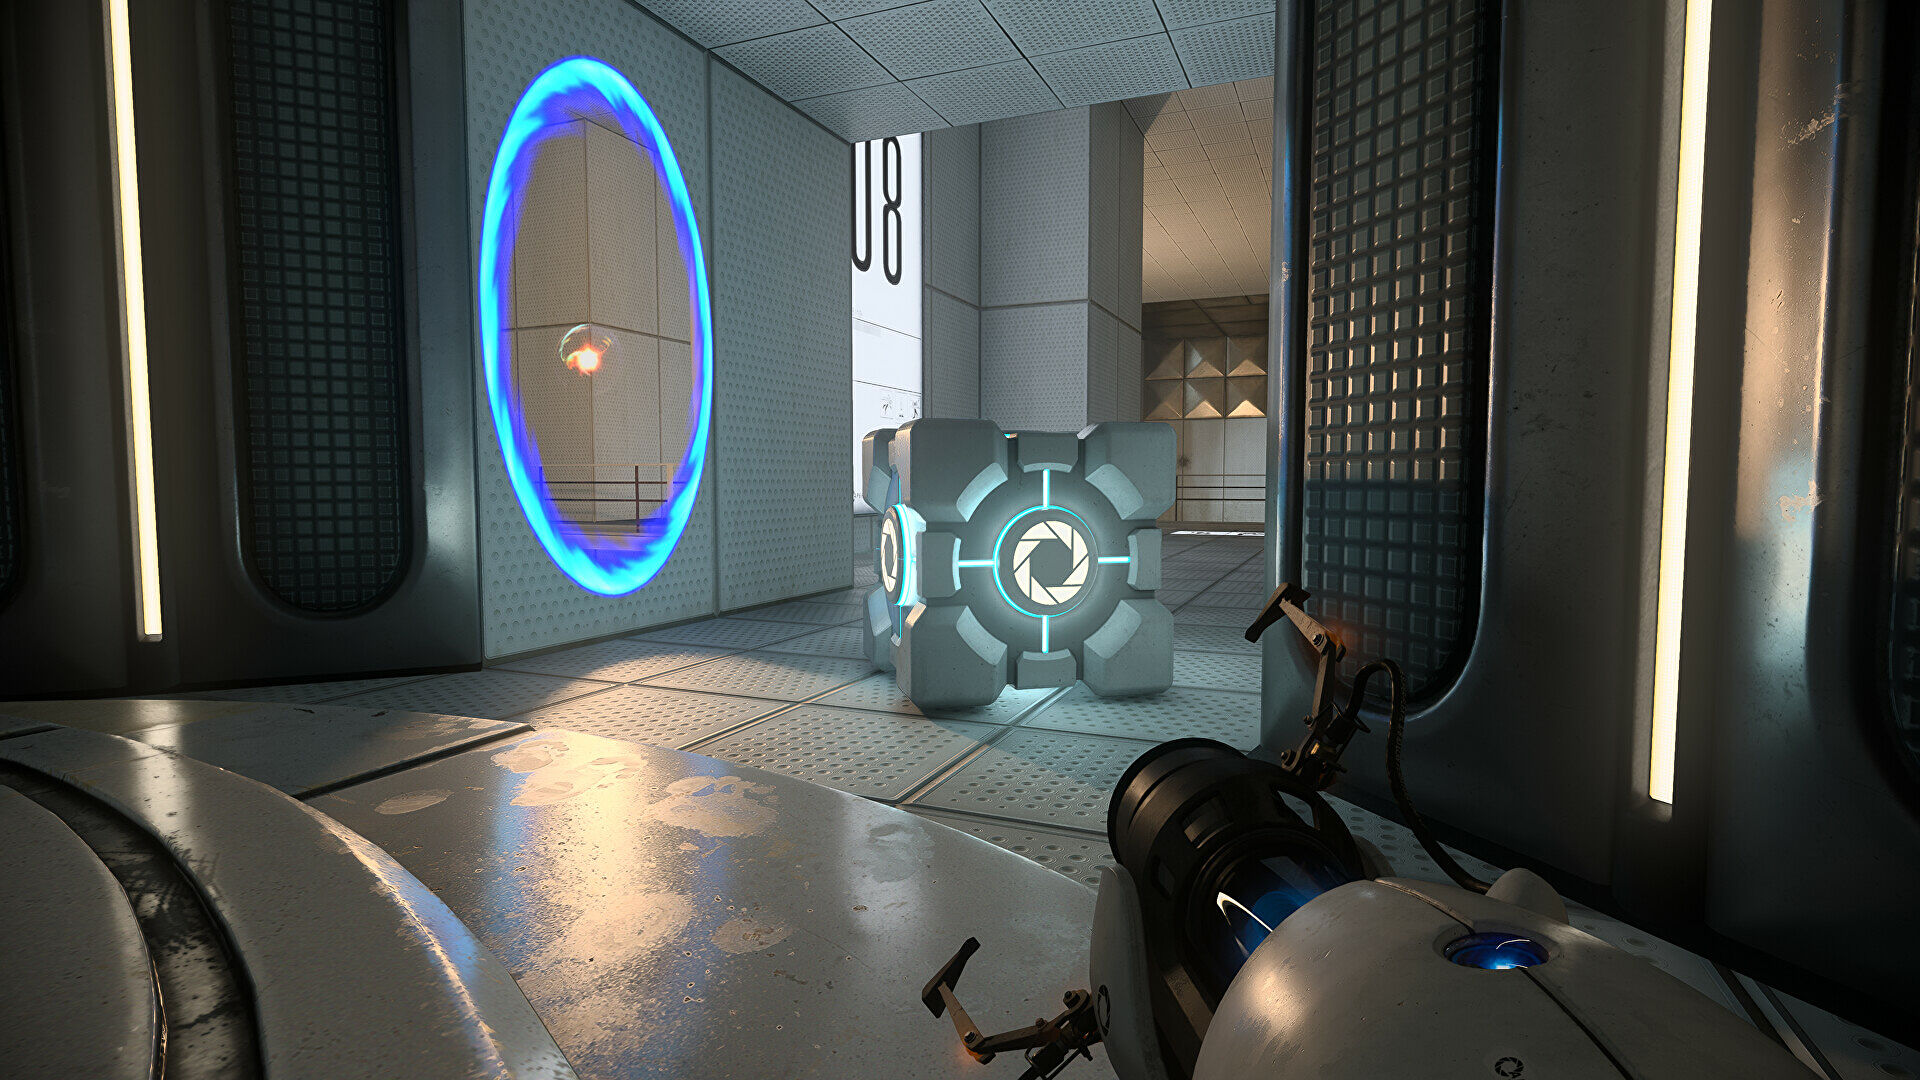 Portal with RTX has popped onto Steam, but good luck running it